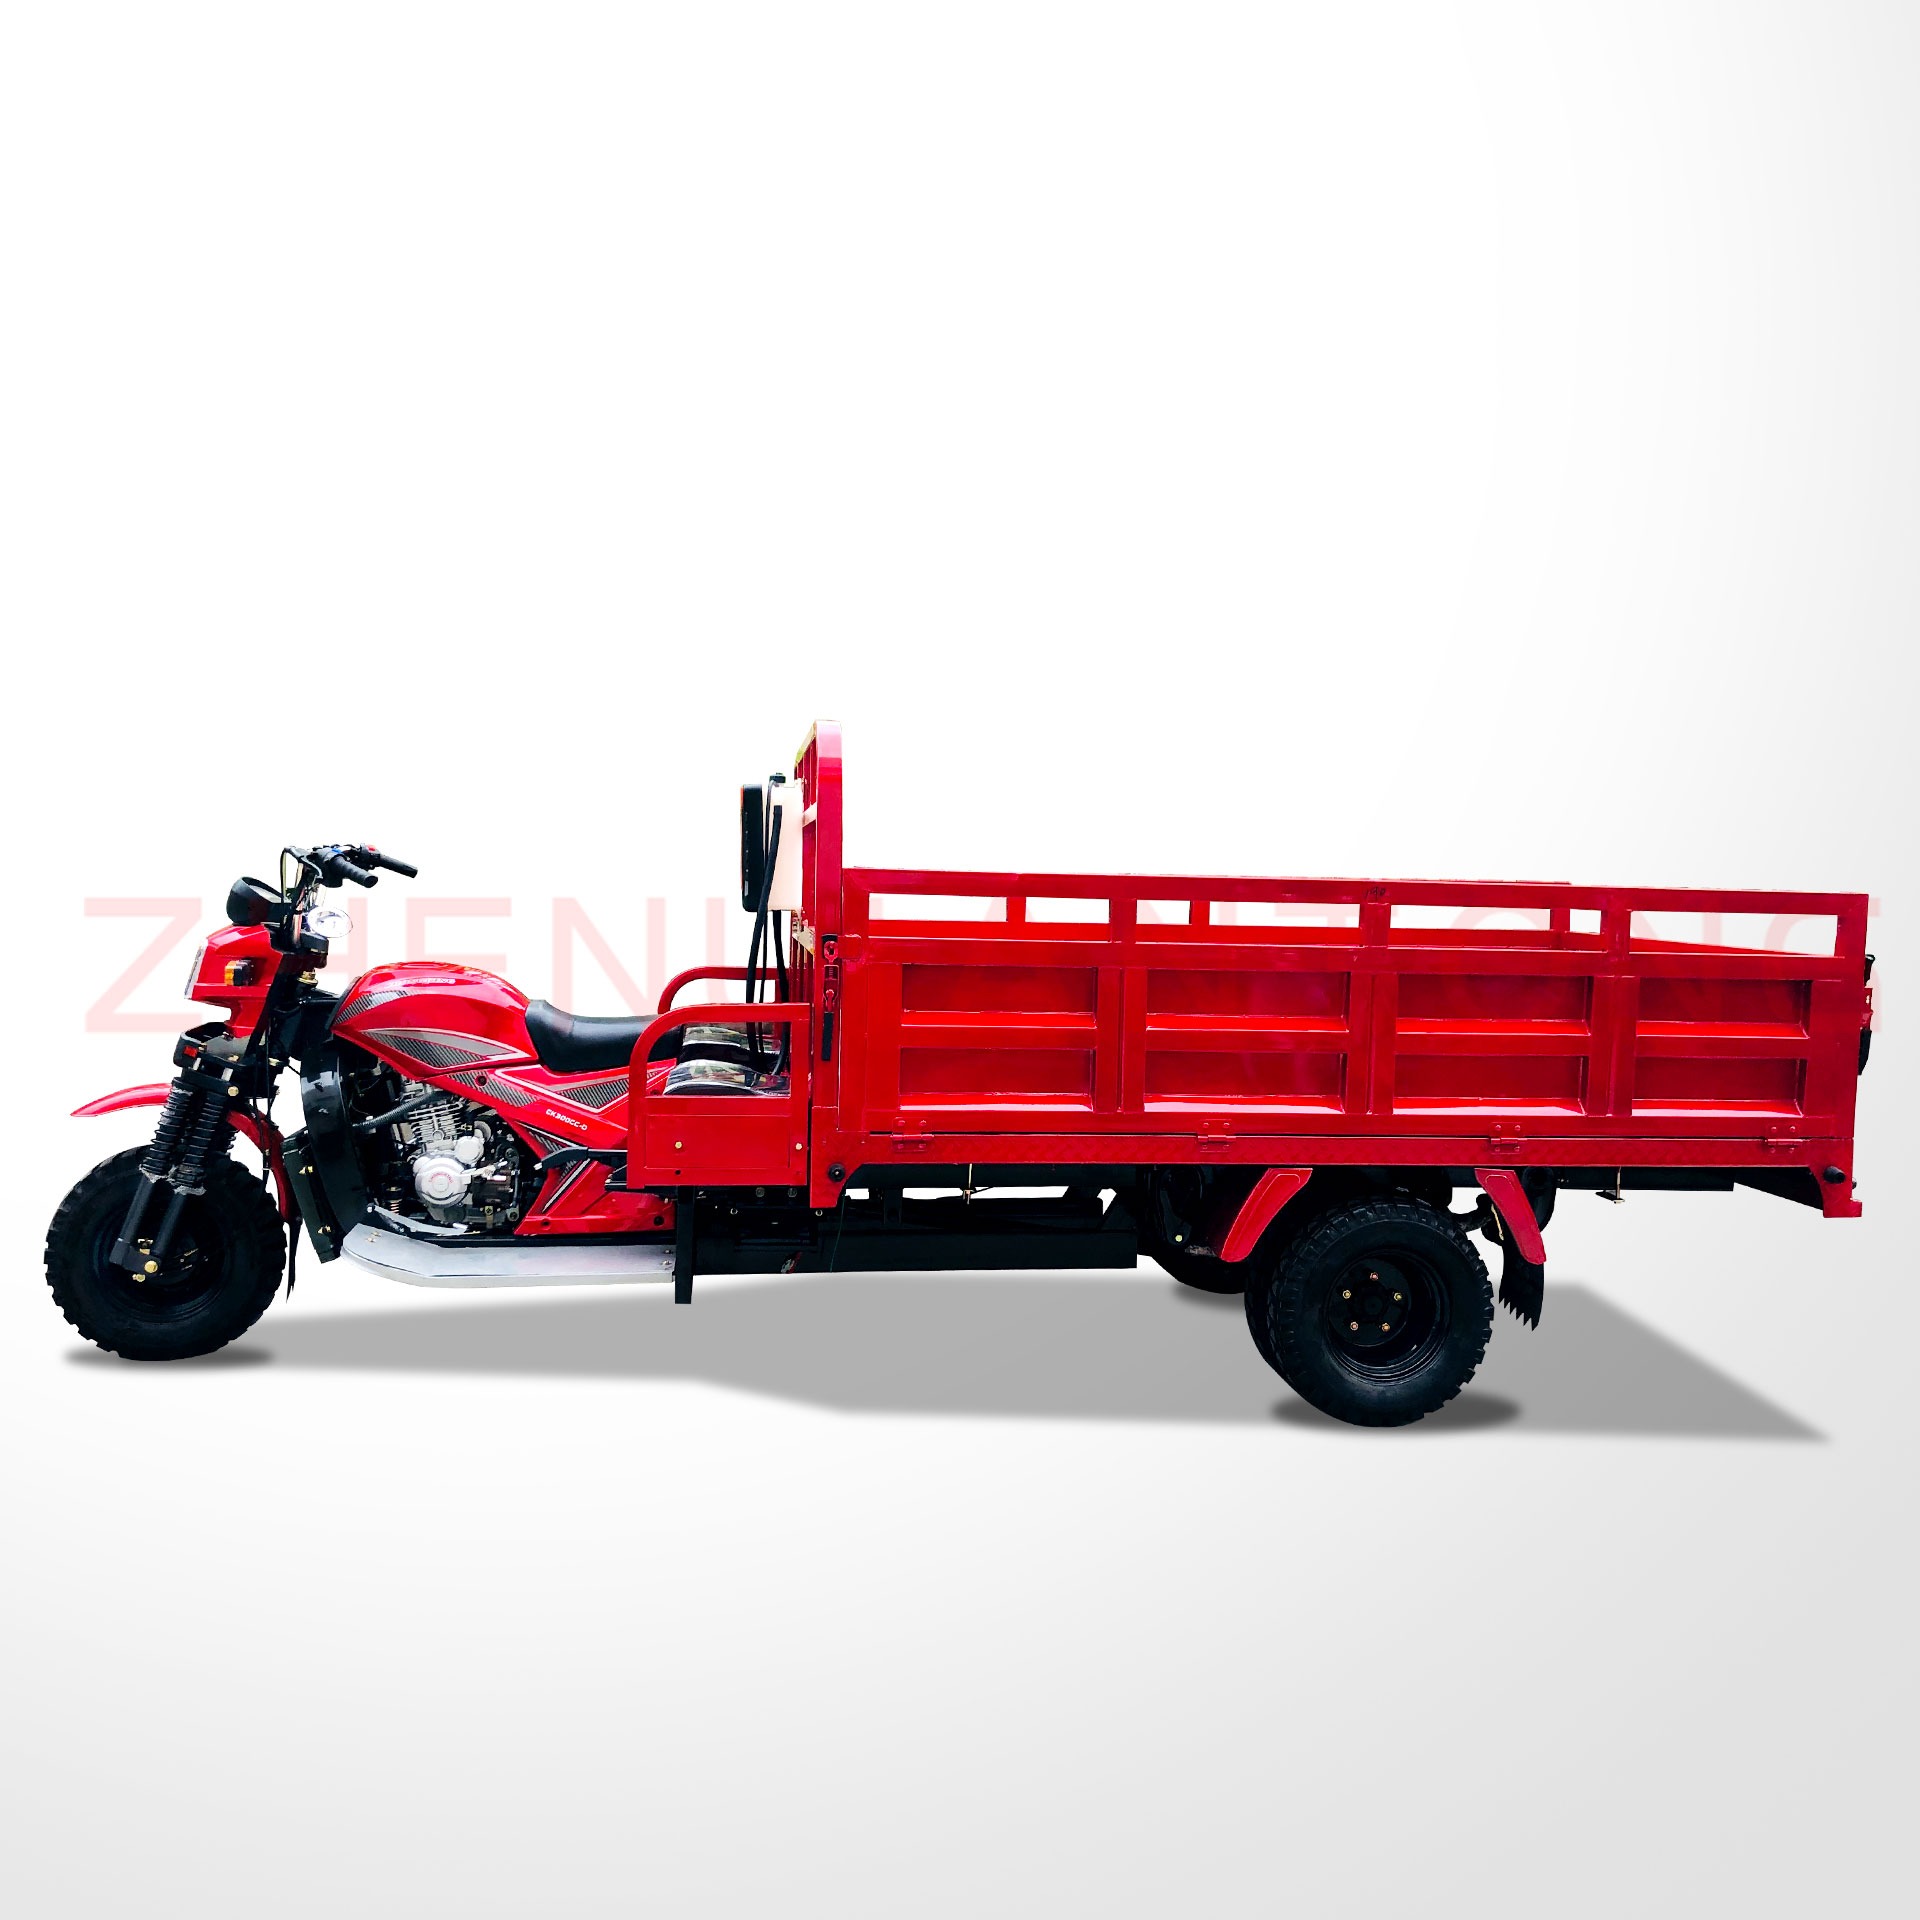 Big Space CCC Trike 3 Wheel Motor Tricycle Gas 3 wheels tricycle heavy duty cargo 250cc  box container